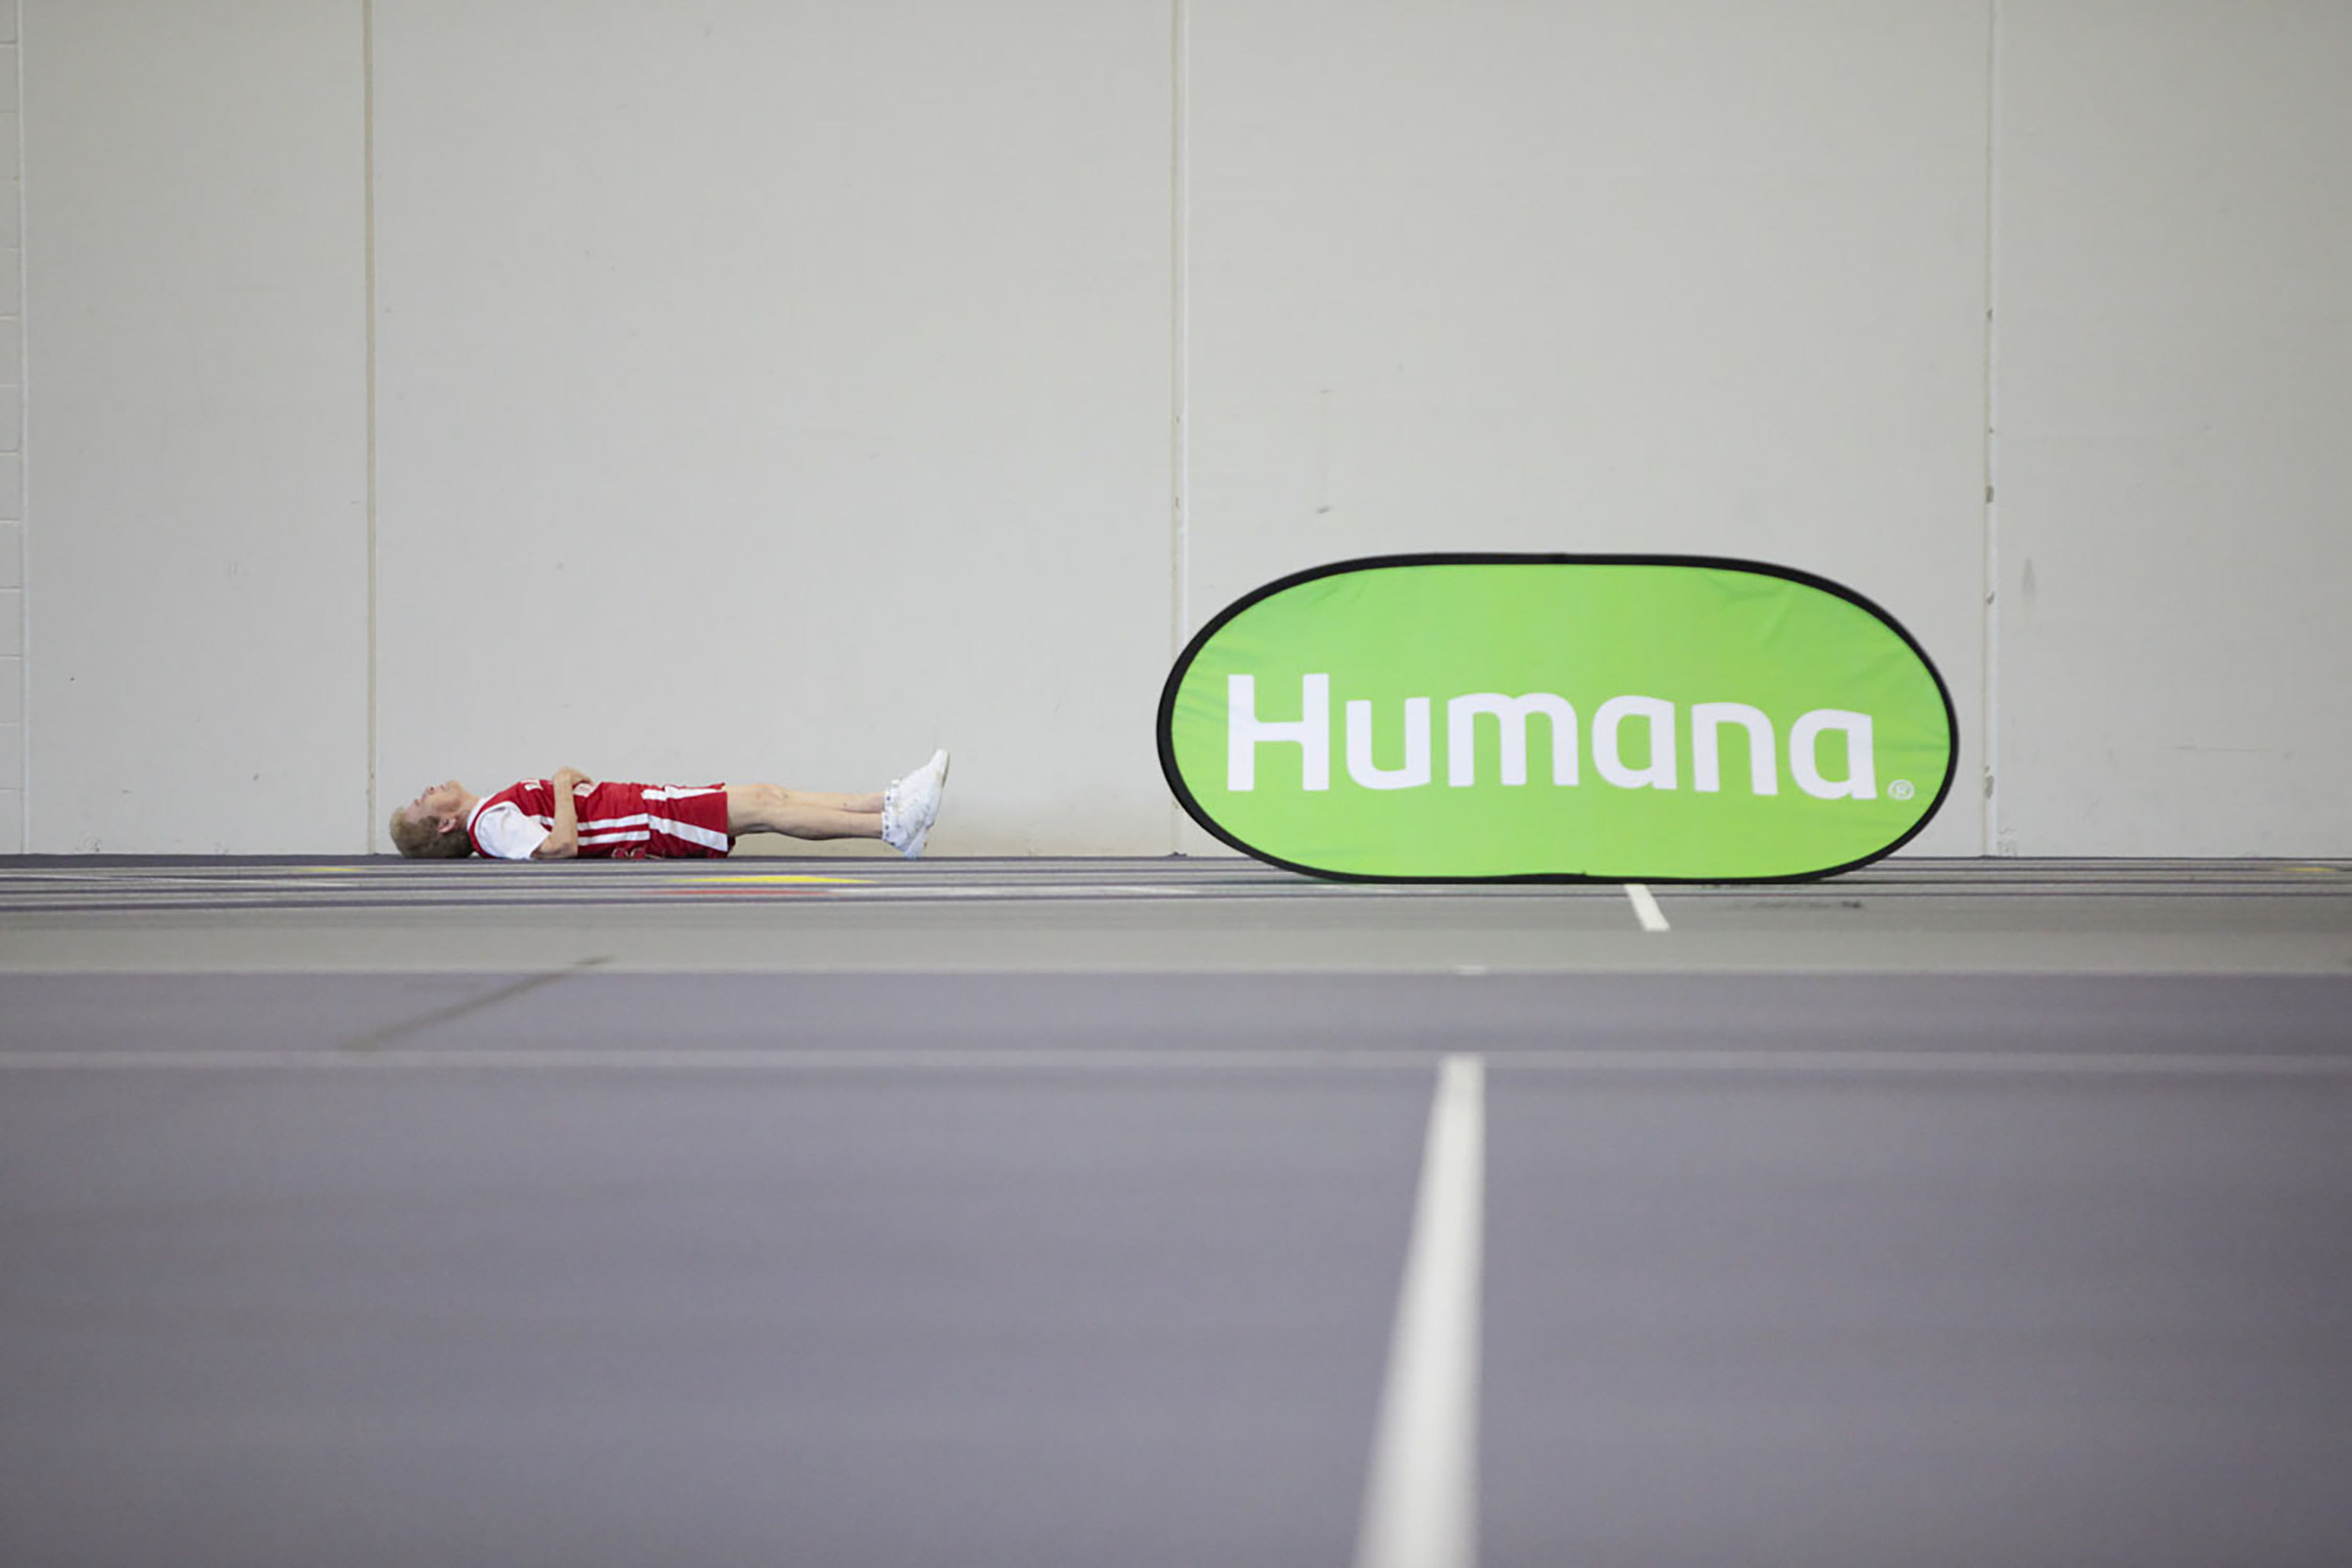  An athlete stretches next to a Humana sign during the 2015 National Senior Games basketball competition that took place on Jul. 14, 2015 at the University of St. Thomas Basketball Court in St. Paul, MN.&nbsp; 